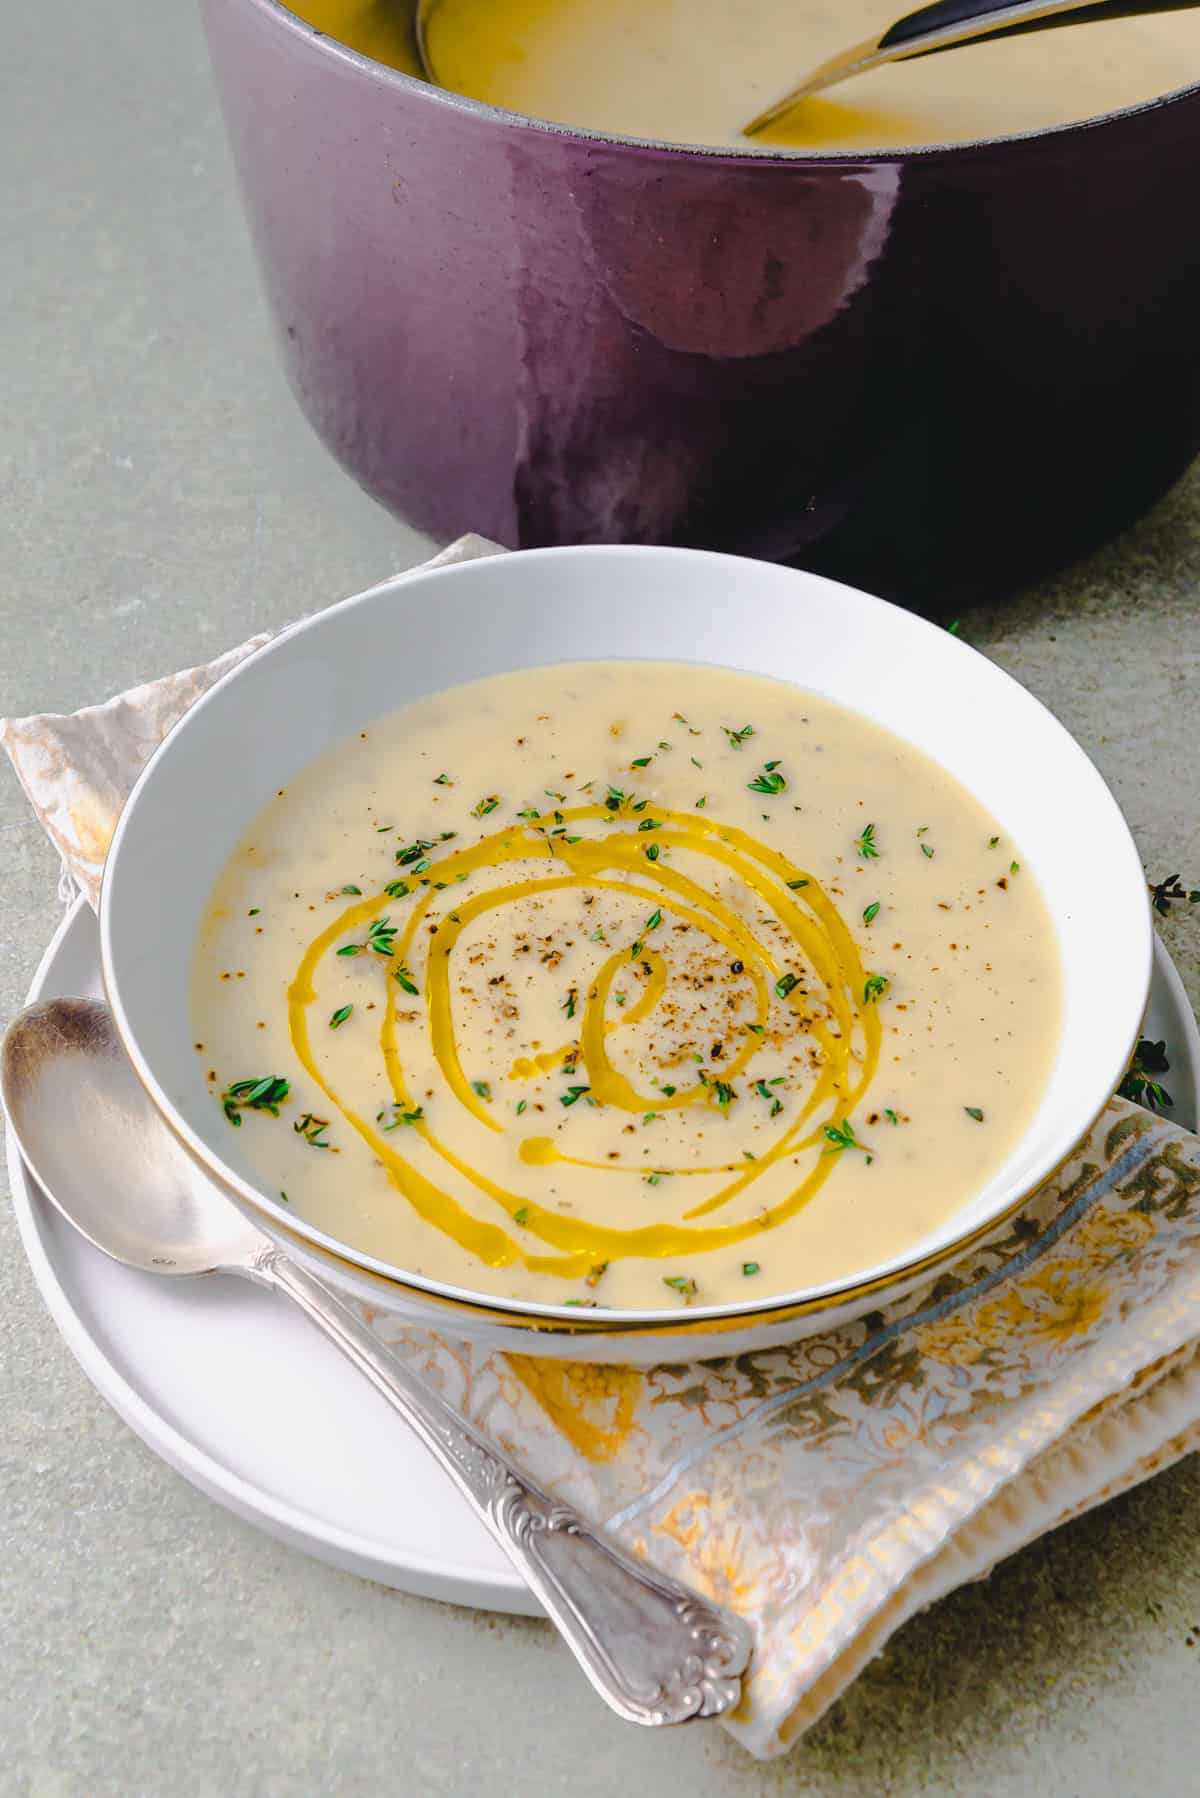 Easy potato leek soup that is incredibly creamy and garnished with fresh thyme and olive oil.